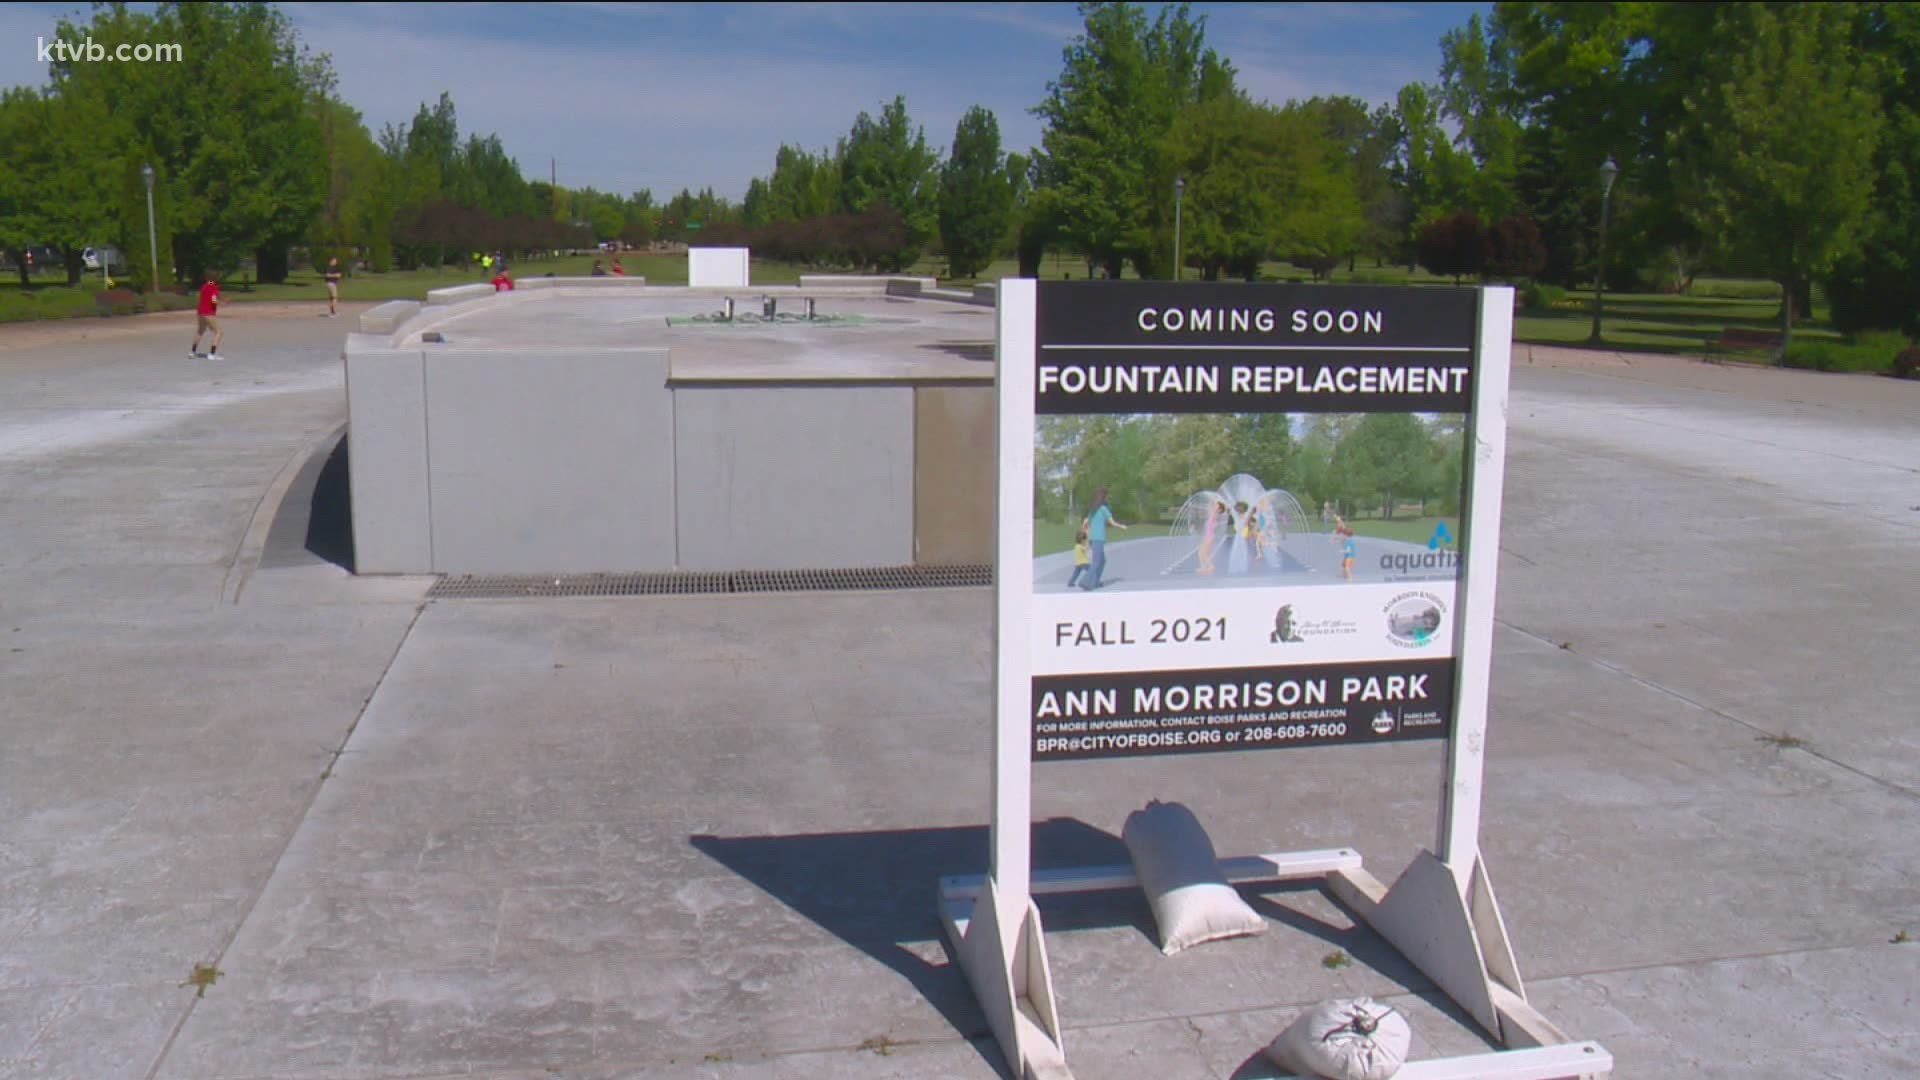 Parks Director Doug Holloway says the new fountain will be more kid friendly.